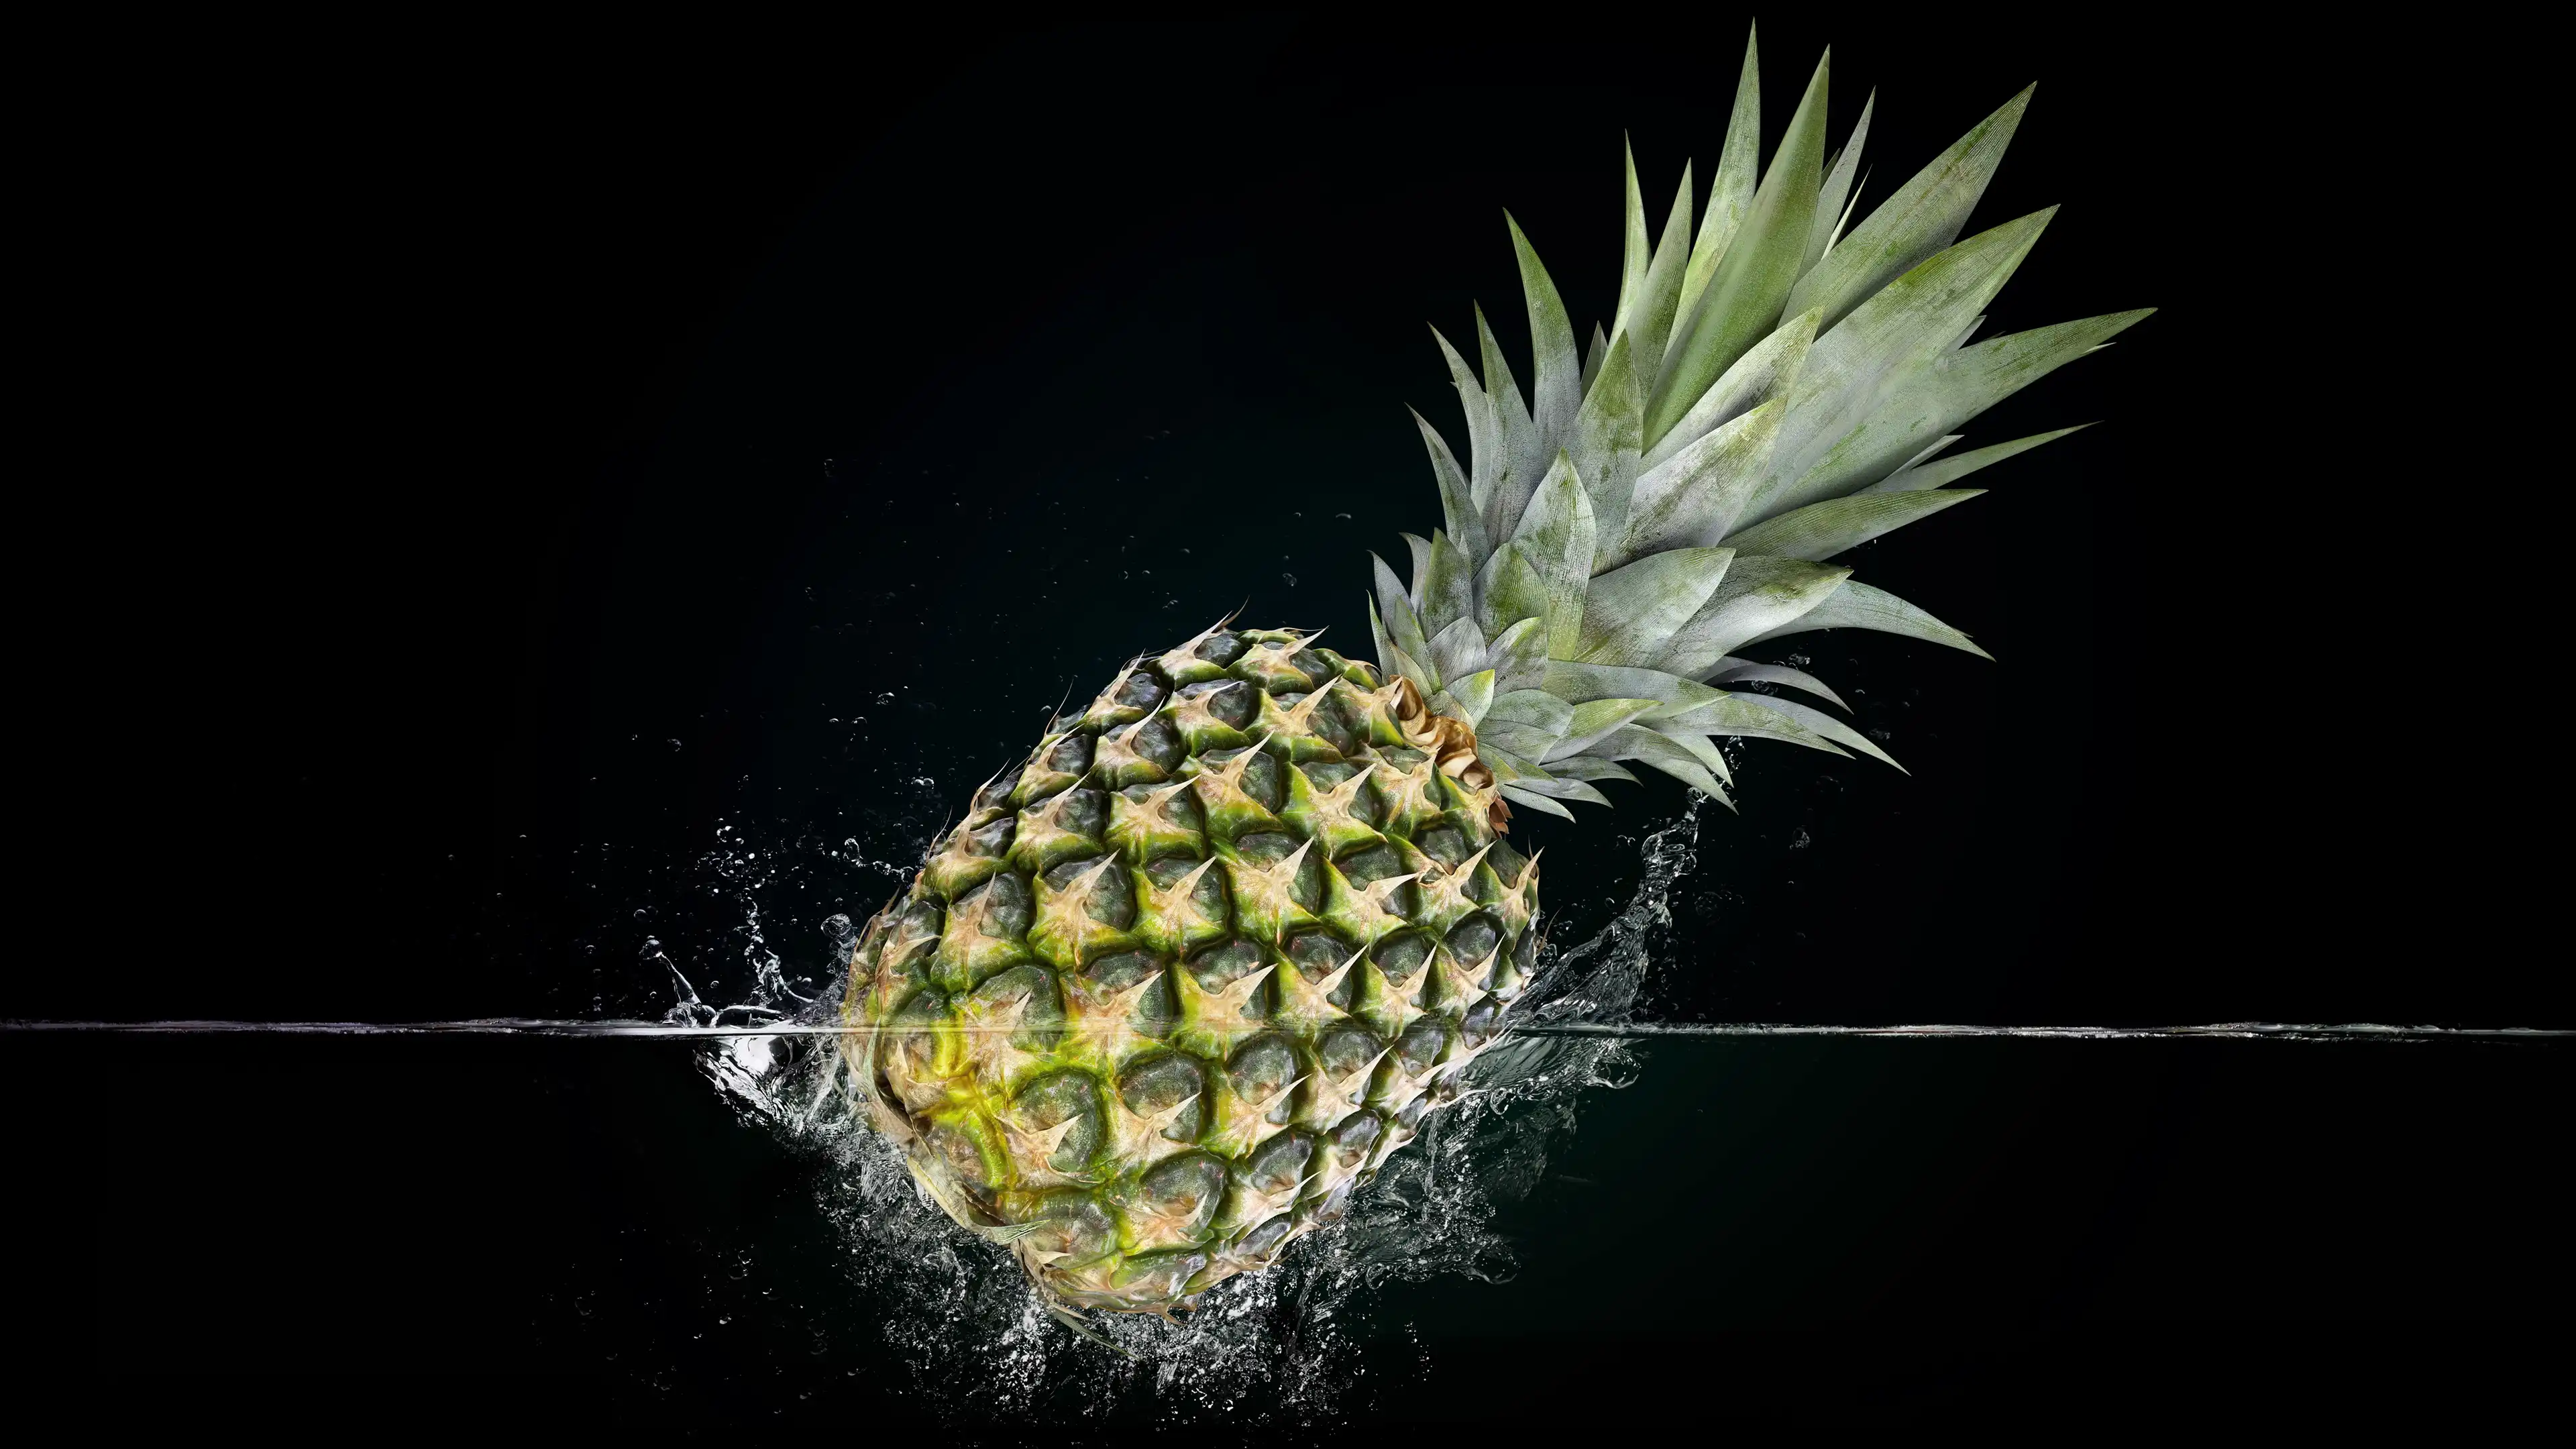 Pineapple on a black background with water splashes. 4K